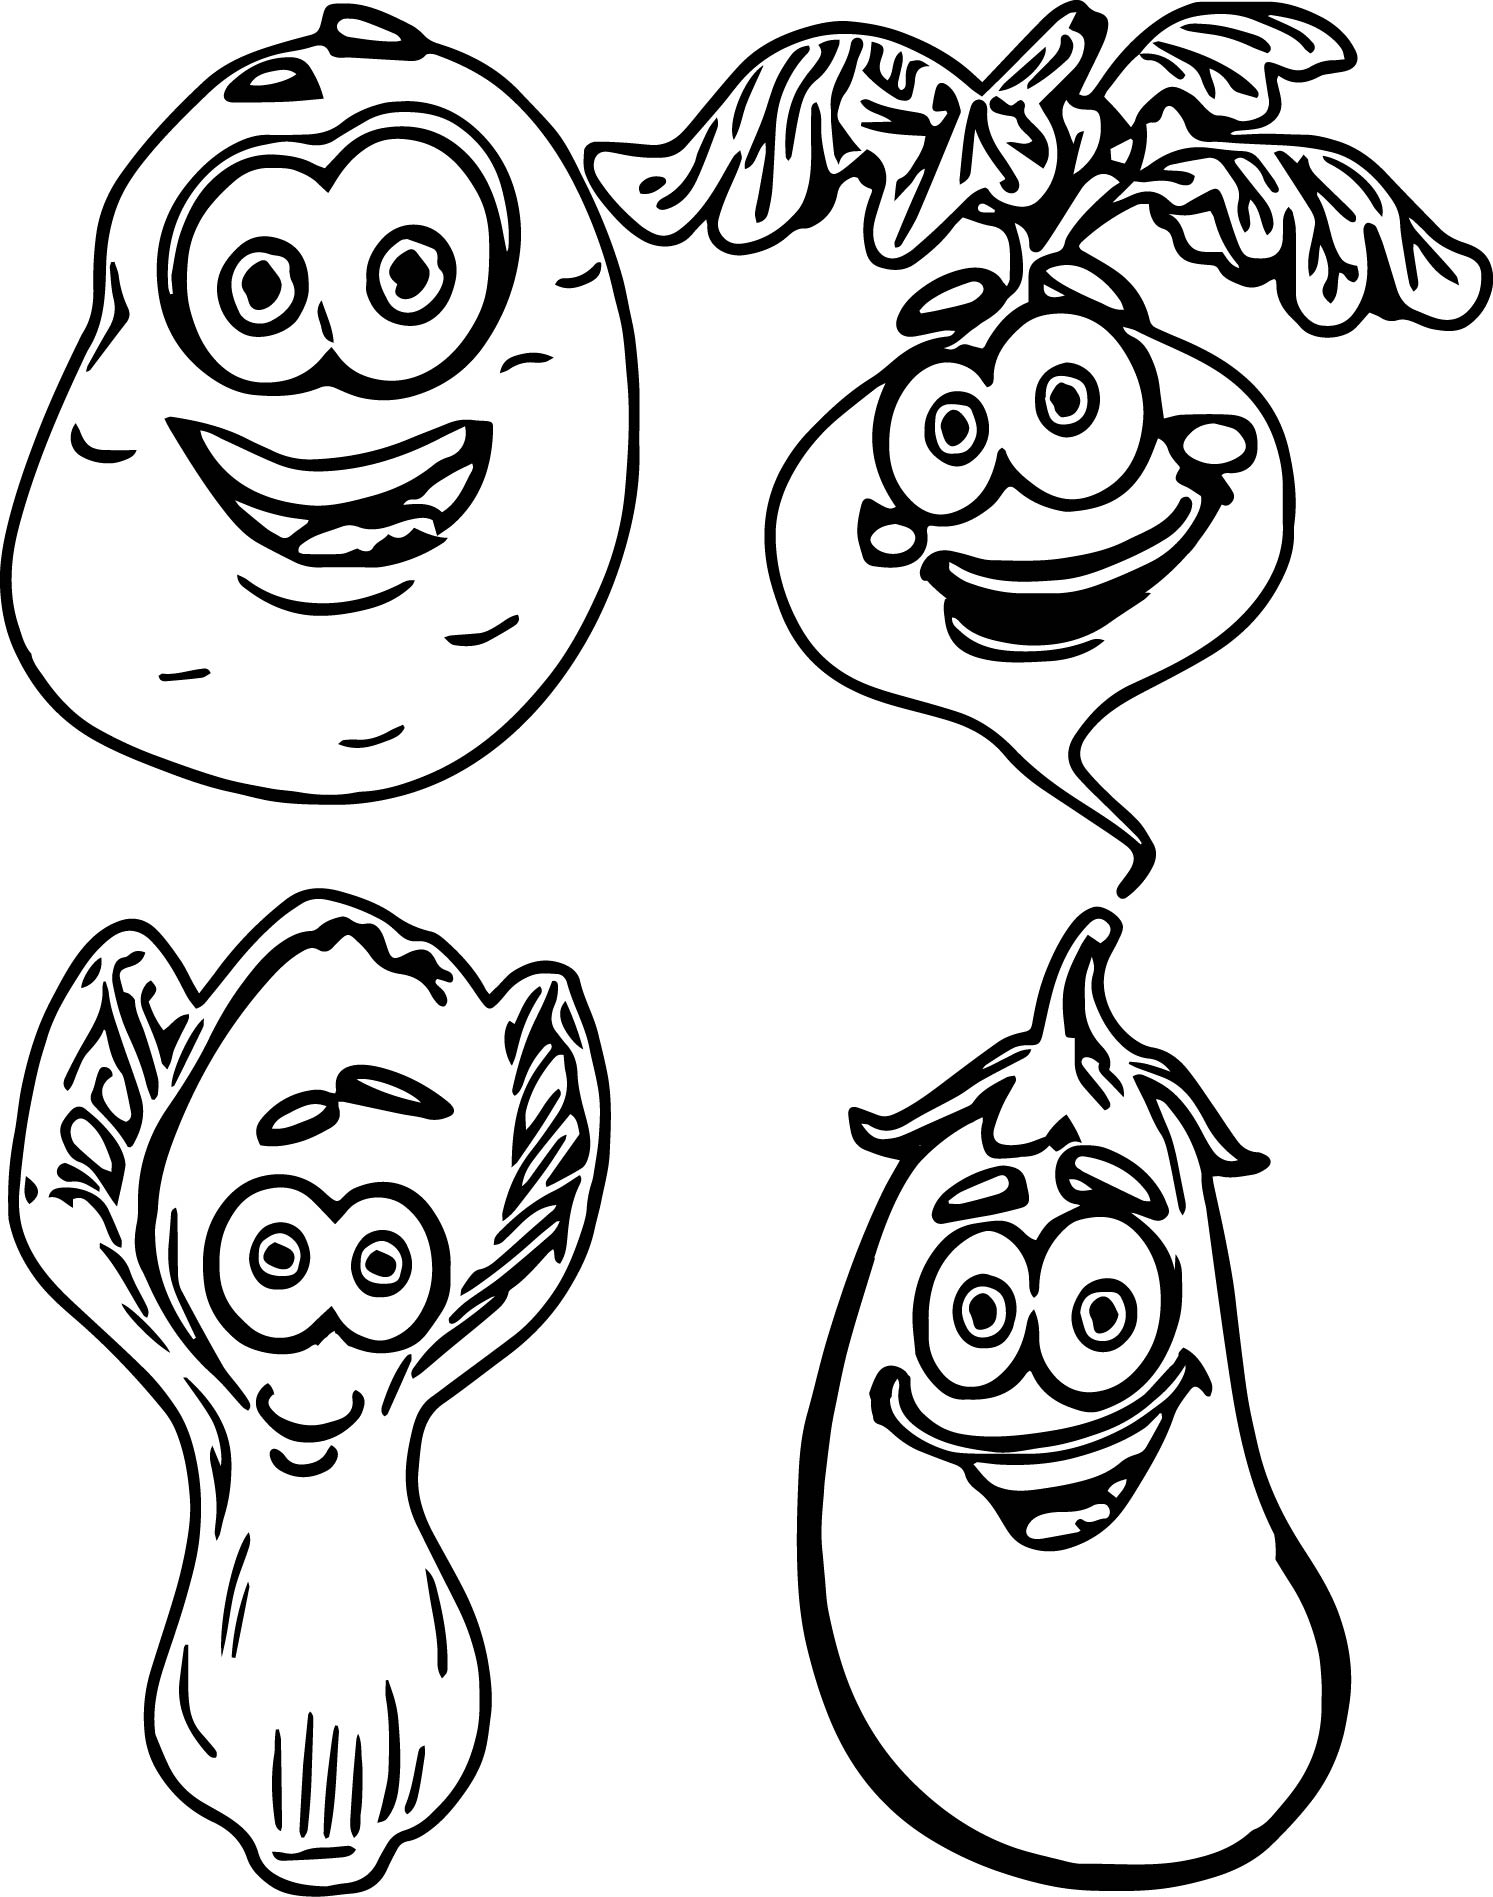 Happy Vegetables Coloring Page